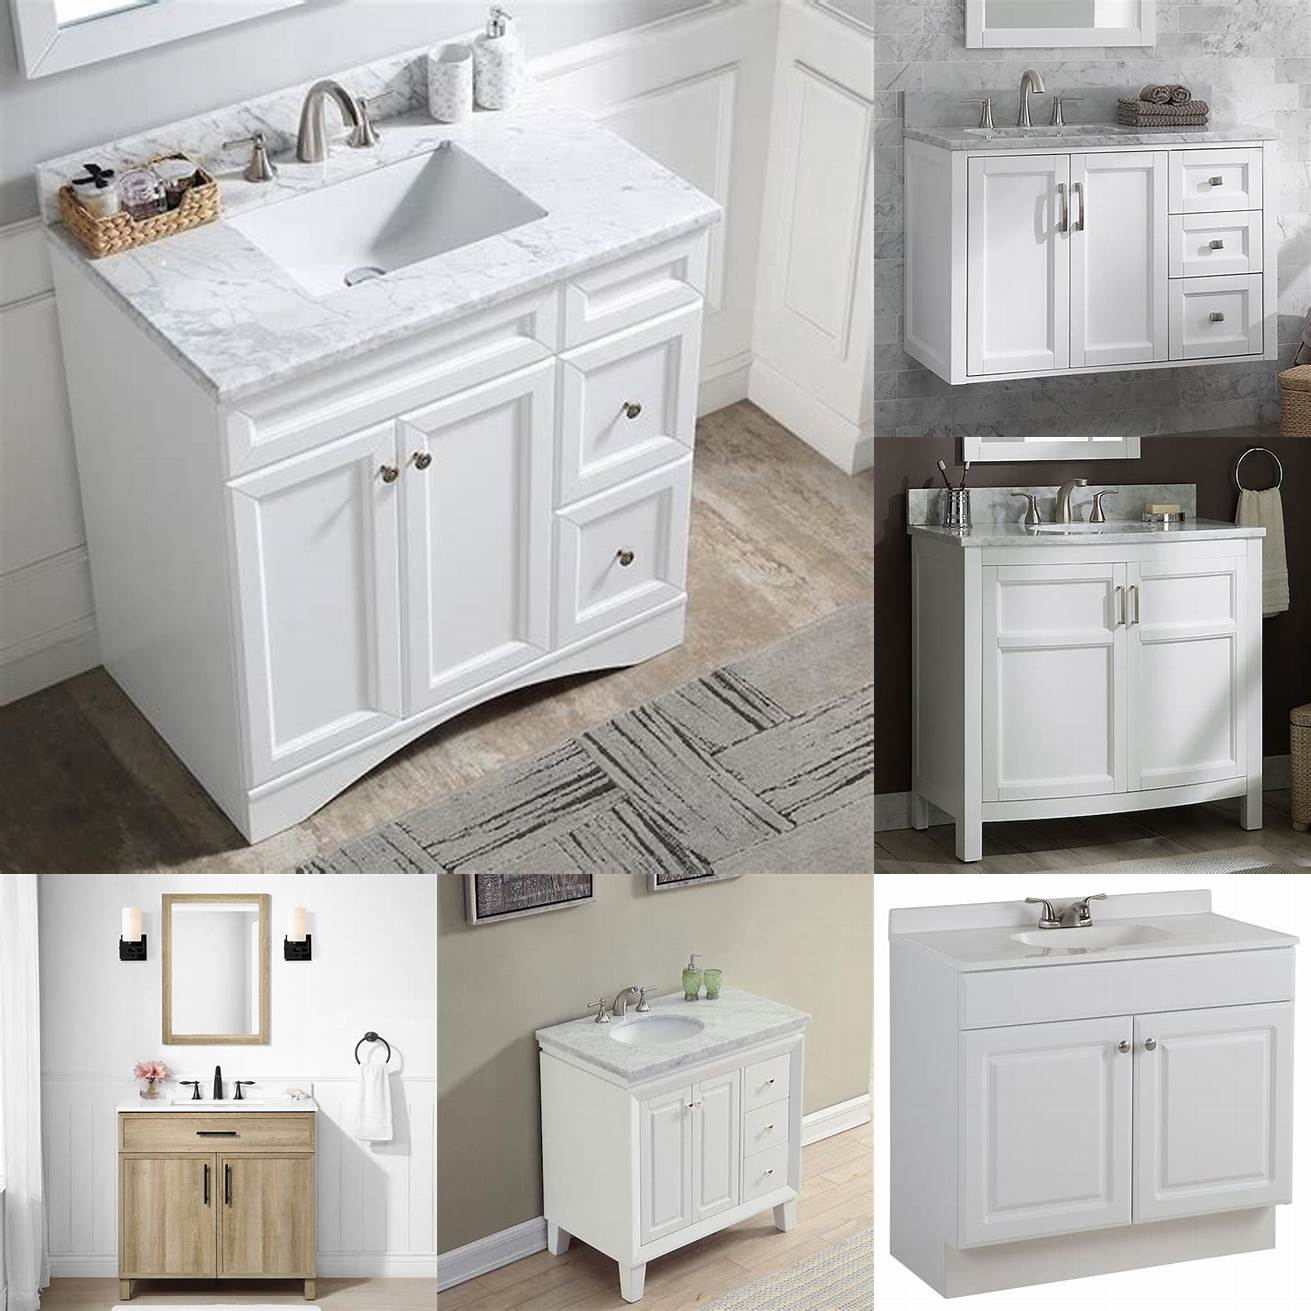 The Lowes Bathroom Vanity 36 Inch in white finish